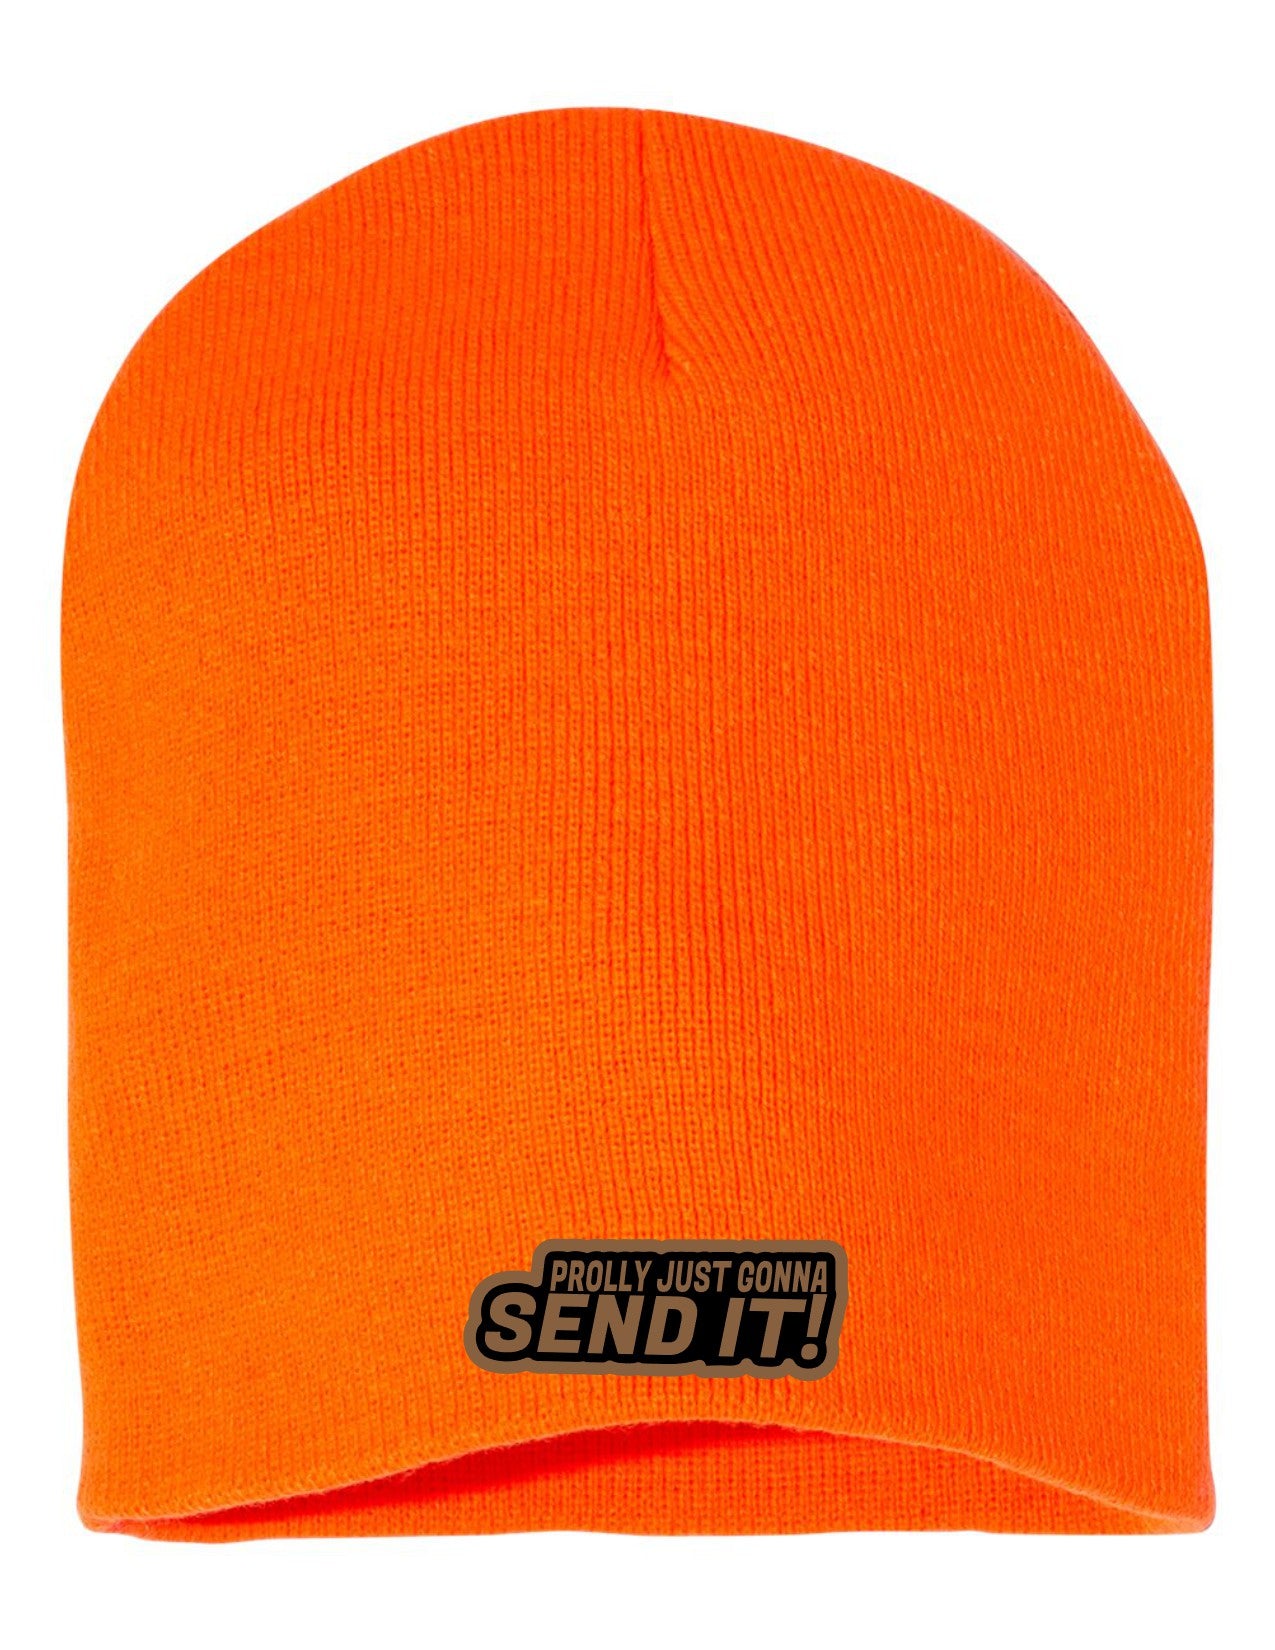 Send It Leather Patch Beanie